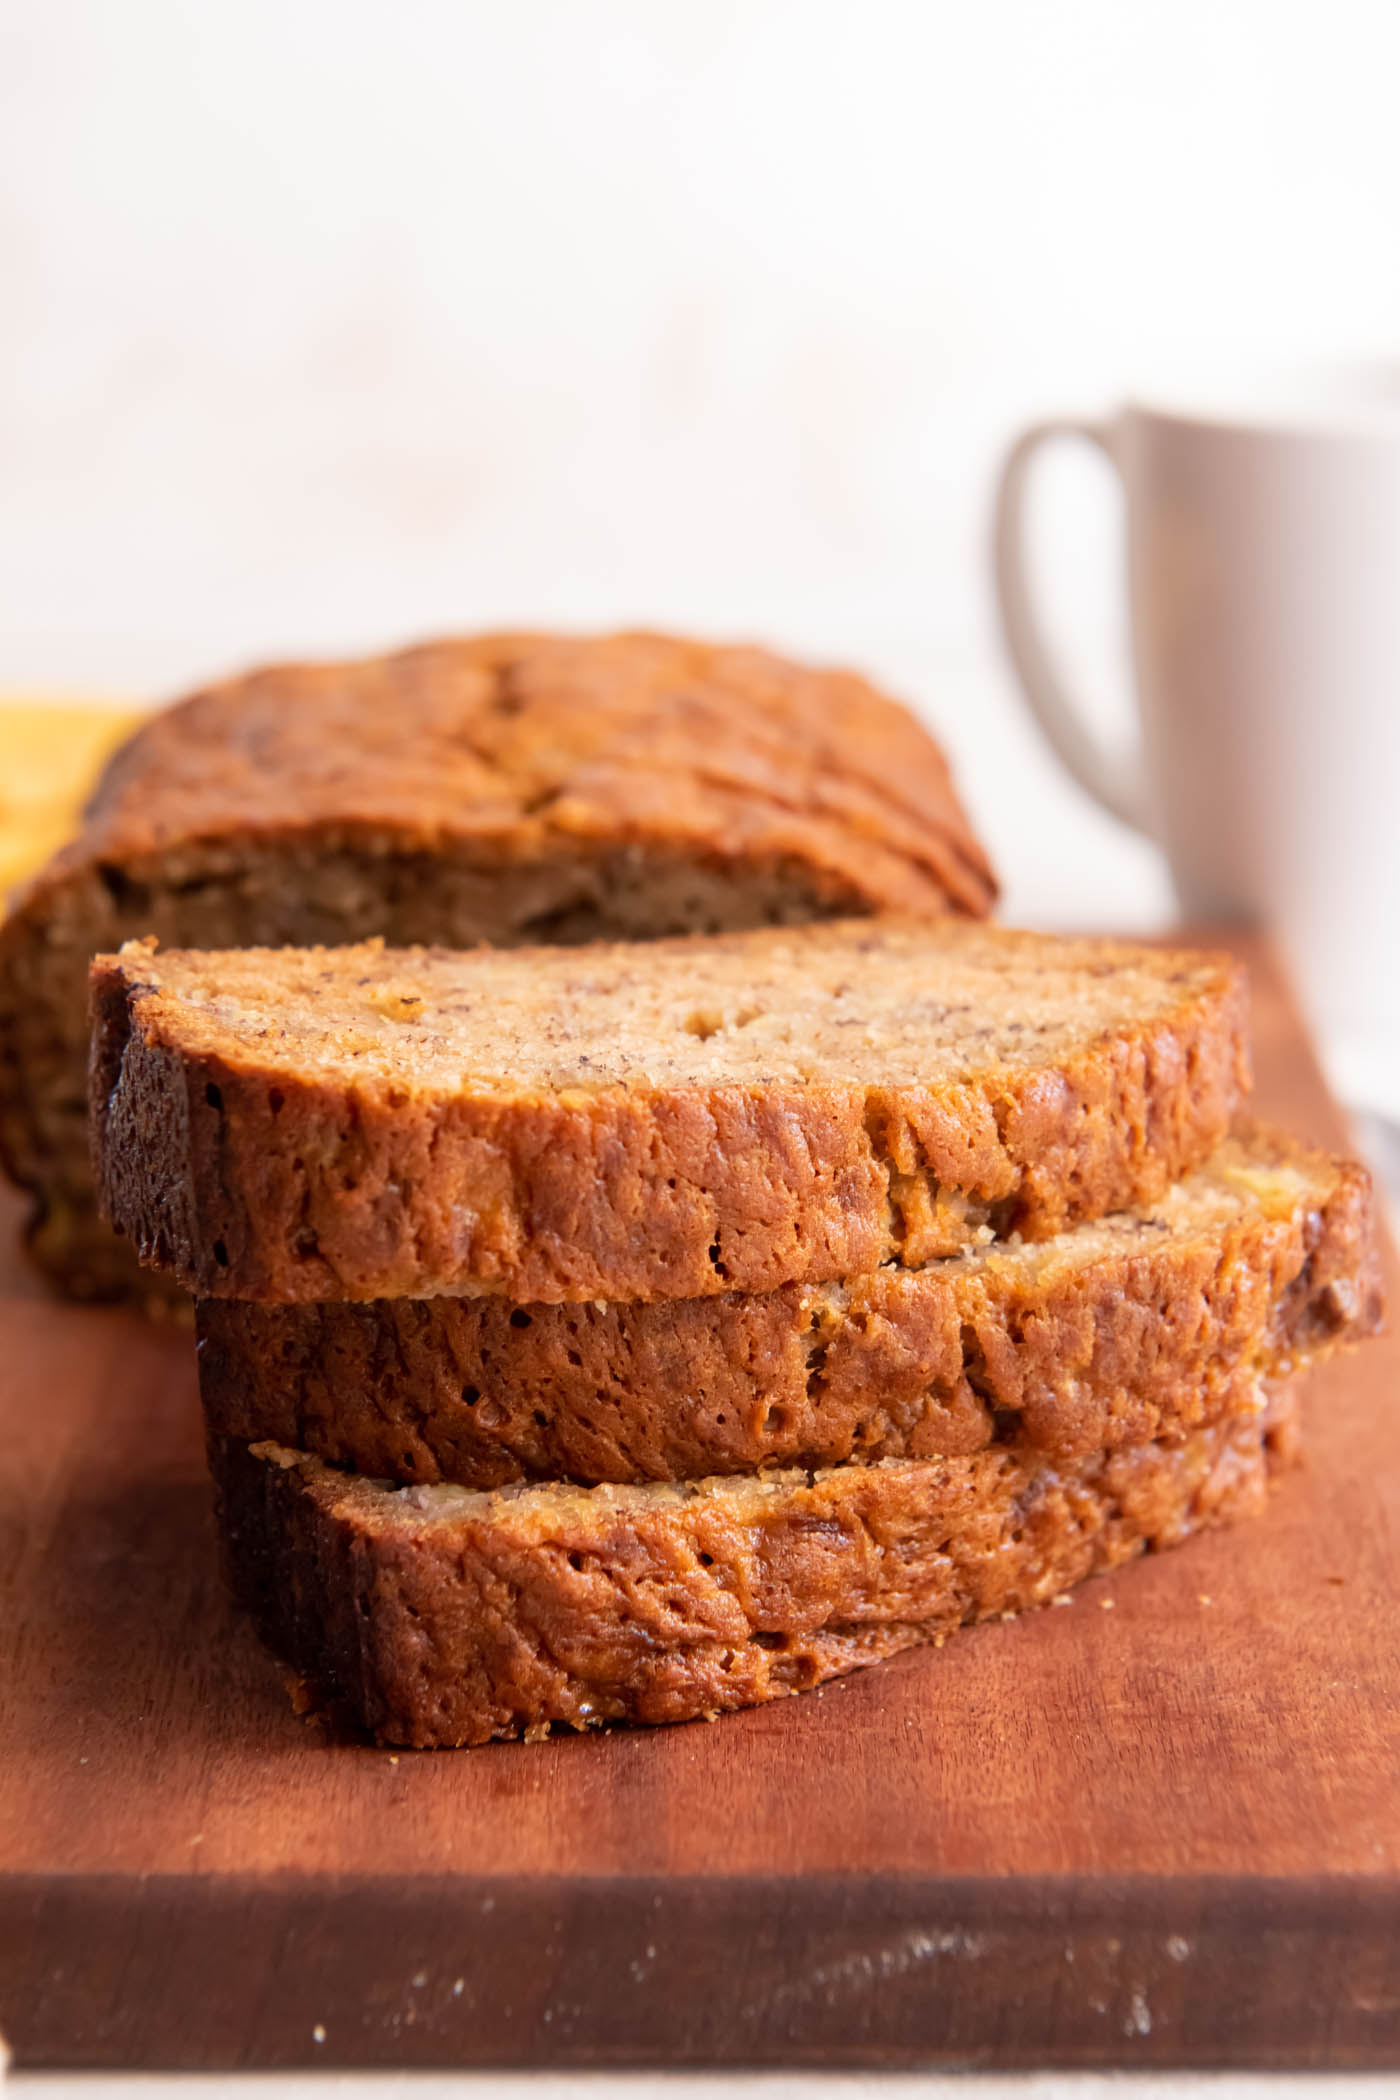 Three slices of banana bread stacked on top of each other with rest of loaf and white mug in background.